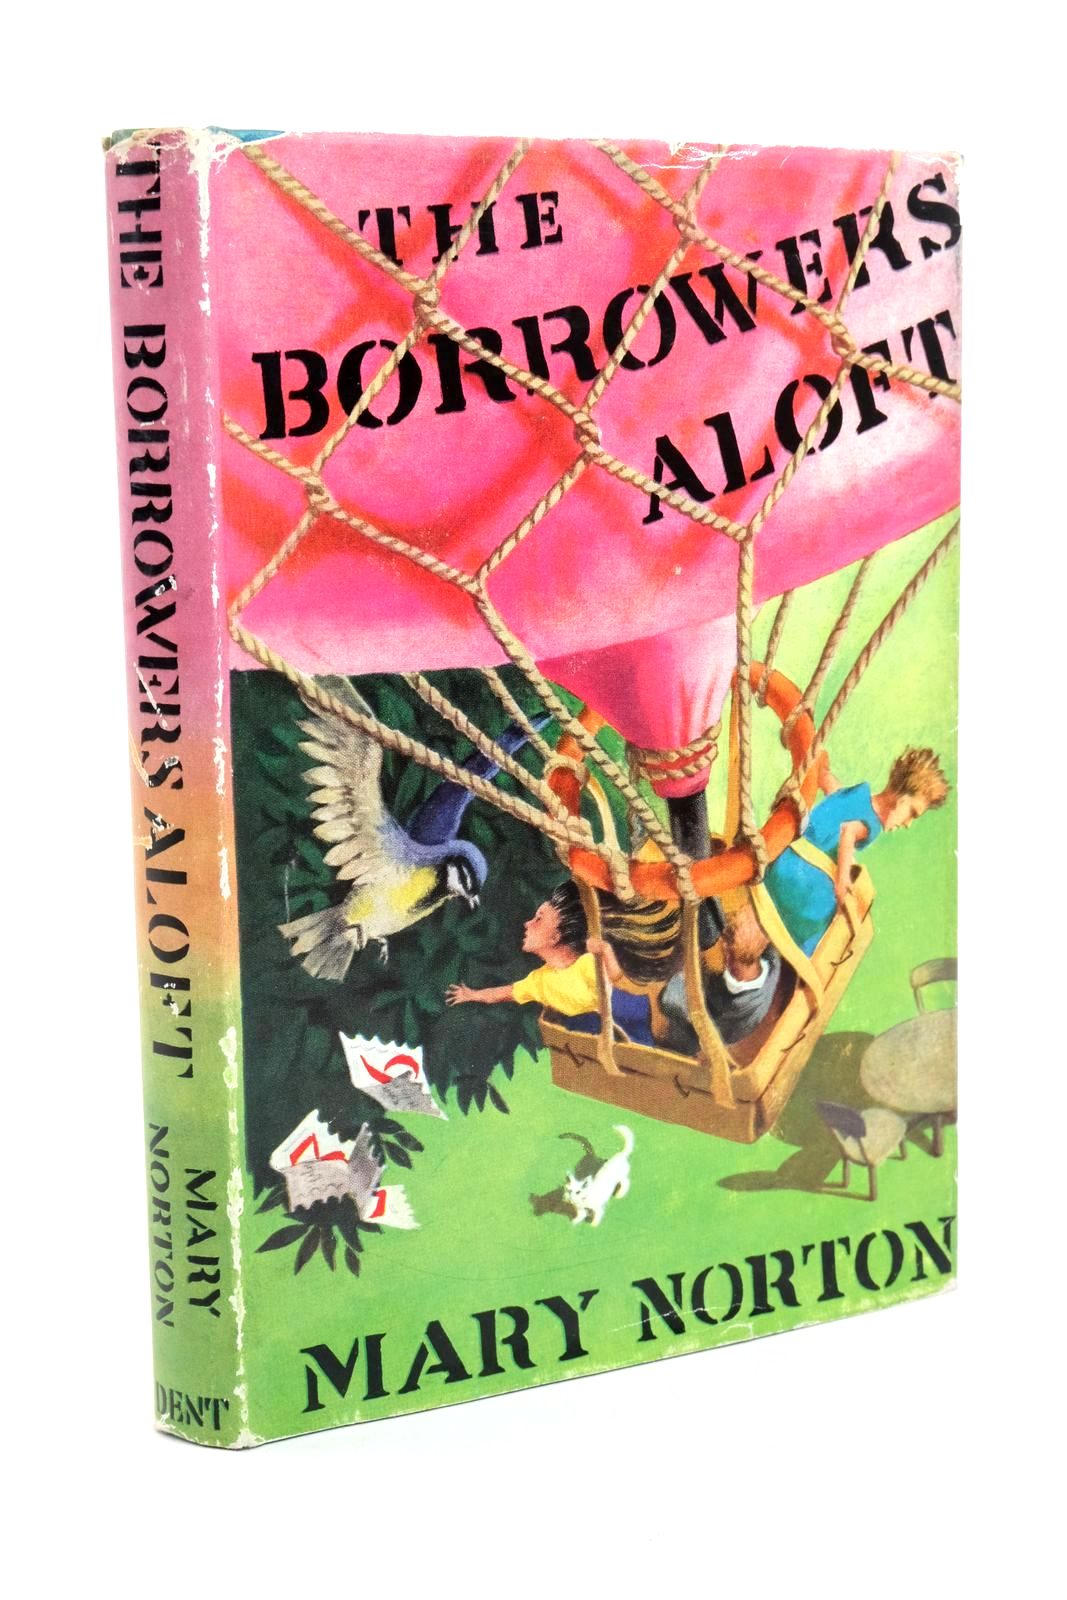 Photo of THE BORROWERS ALOFT written by Norton, Mary illustrated by Stanley, Diana published by J.M. Dent &amp; Sons Ltd. (STOCK CODE: 1322282)  for sale by Stella & Rose's Books